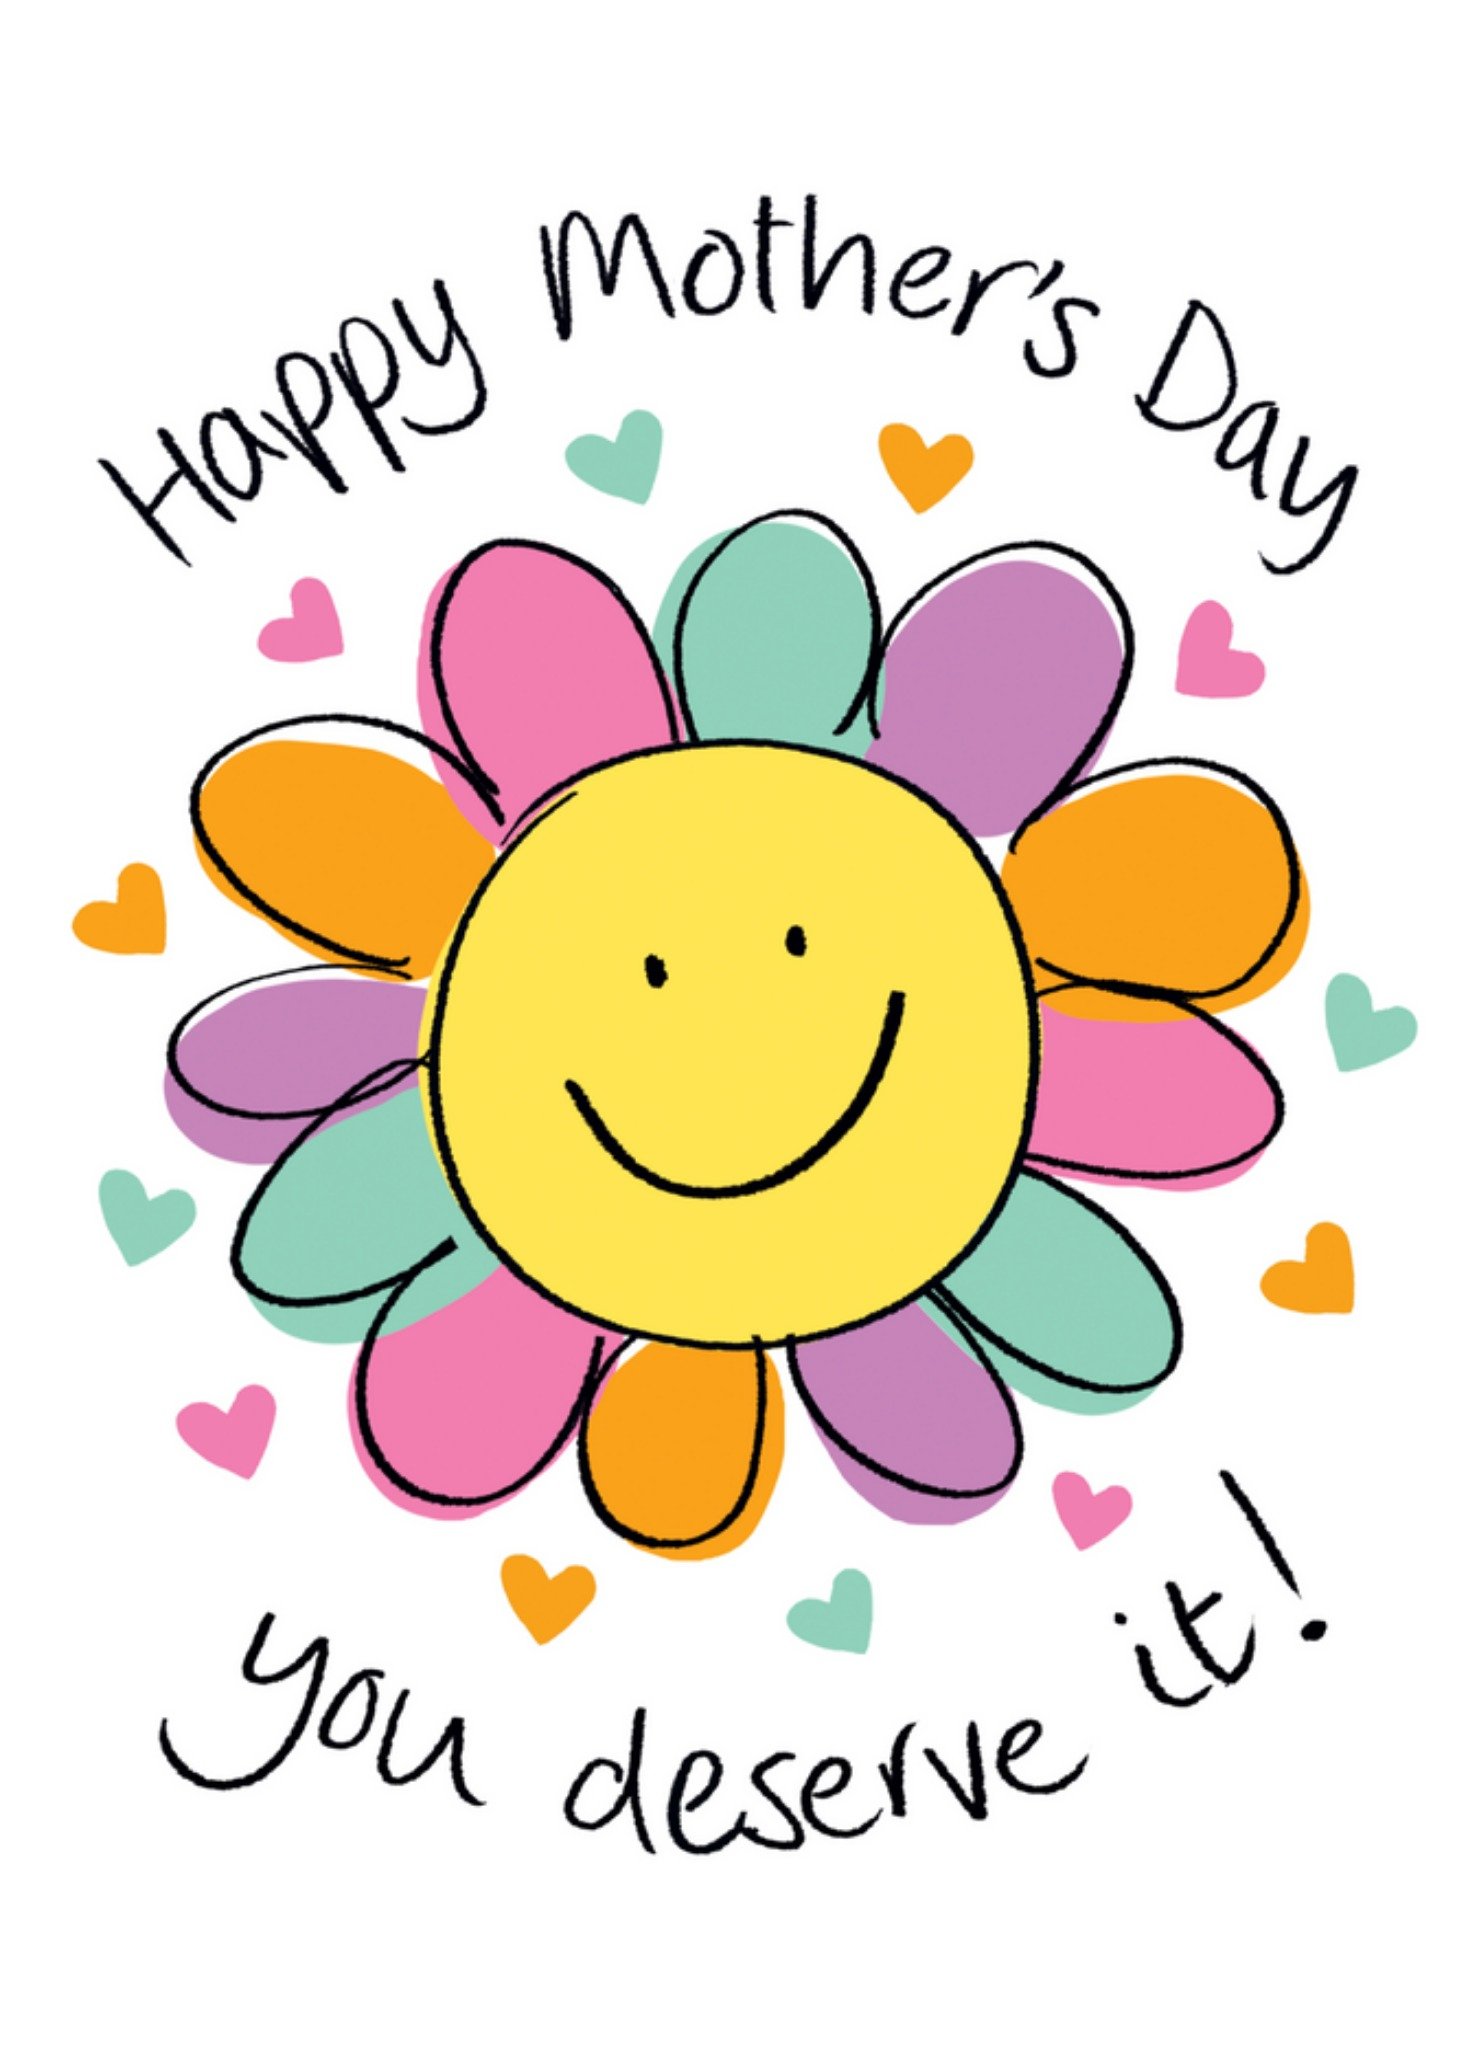 Moonpig Fun Bright Smiley Faced Flower Mother's Day Card Ecard